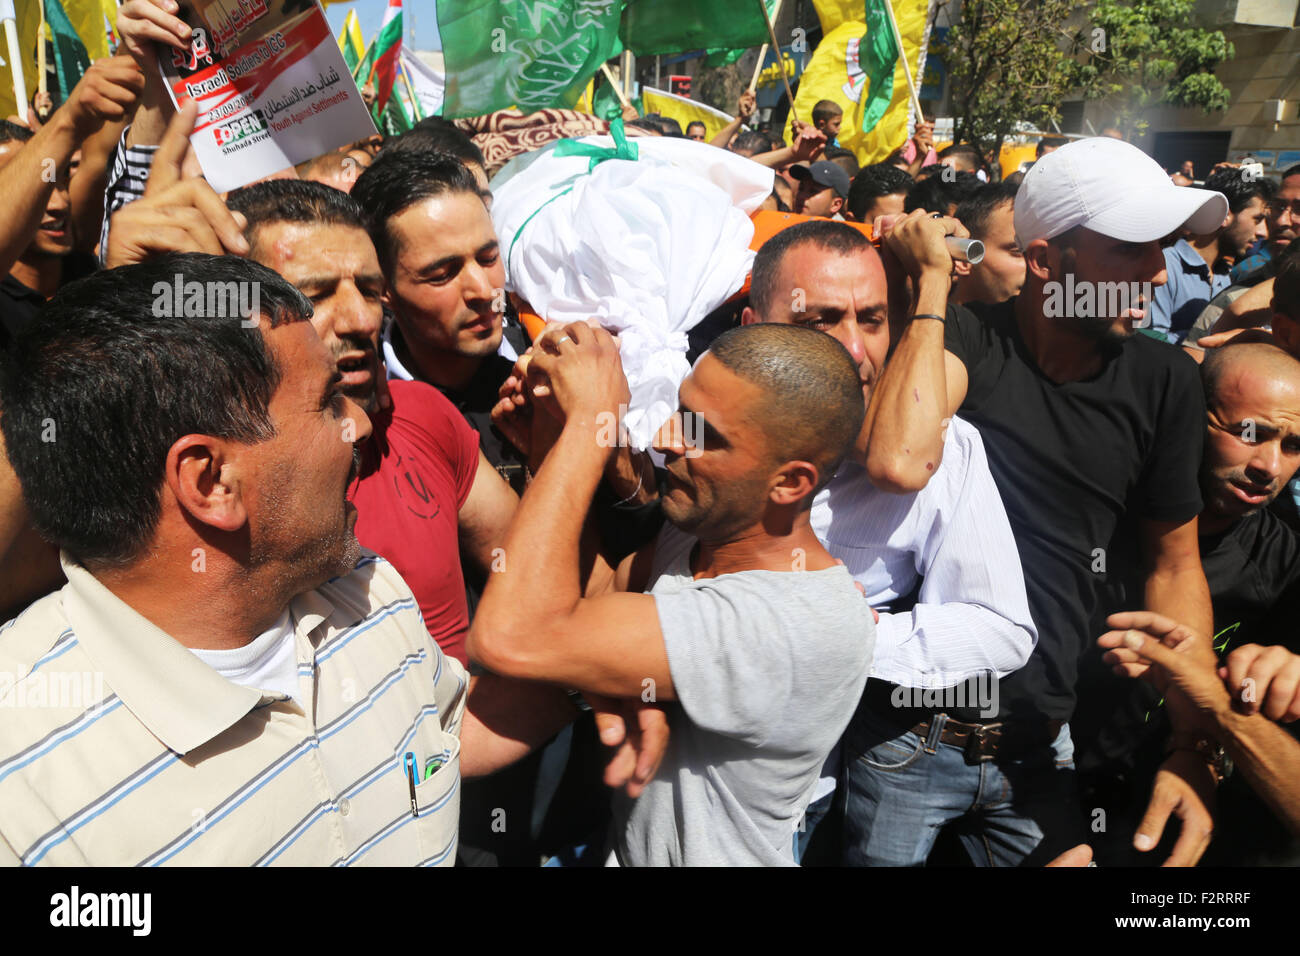 Mourners carry the body of 18-year-old Palestinian Hadeel al-hashlamon, who was shot and killed by Israeli soldiers in the West Bank city of Hebron. In less than 24 hours, the Israeli army shot and killed two Palestinians. On September 22, 2015, the Israeli army claimed that 21-year-old Diyaa Abdul-Halim Talahmah was killed when a hand-made grenade exploded in his hands during clashes with Israeli forces in the village of Khursa, south of Hebron. However, there were contradictory reports from both Palestinian and Israeli sources and photos of the youth's body showed that he had been shot. That Stock Photo